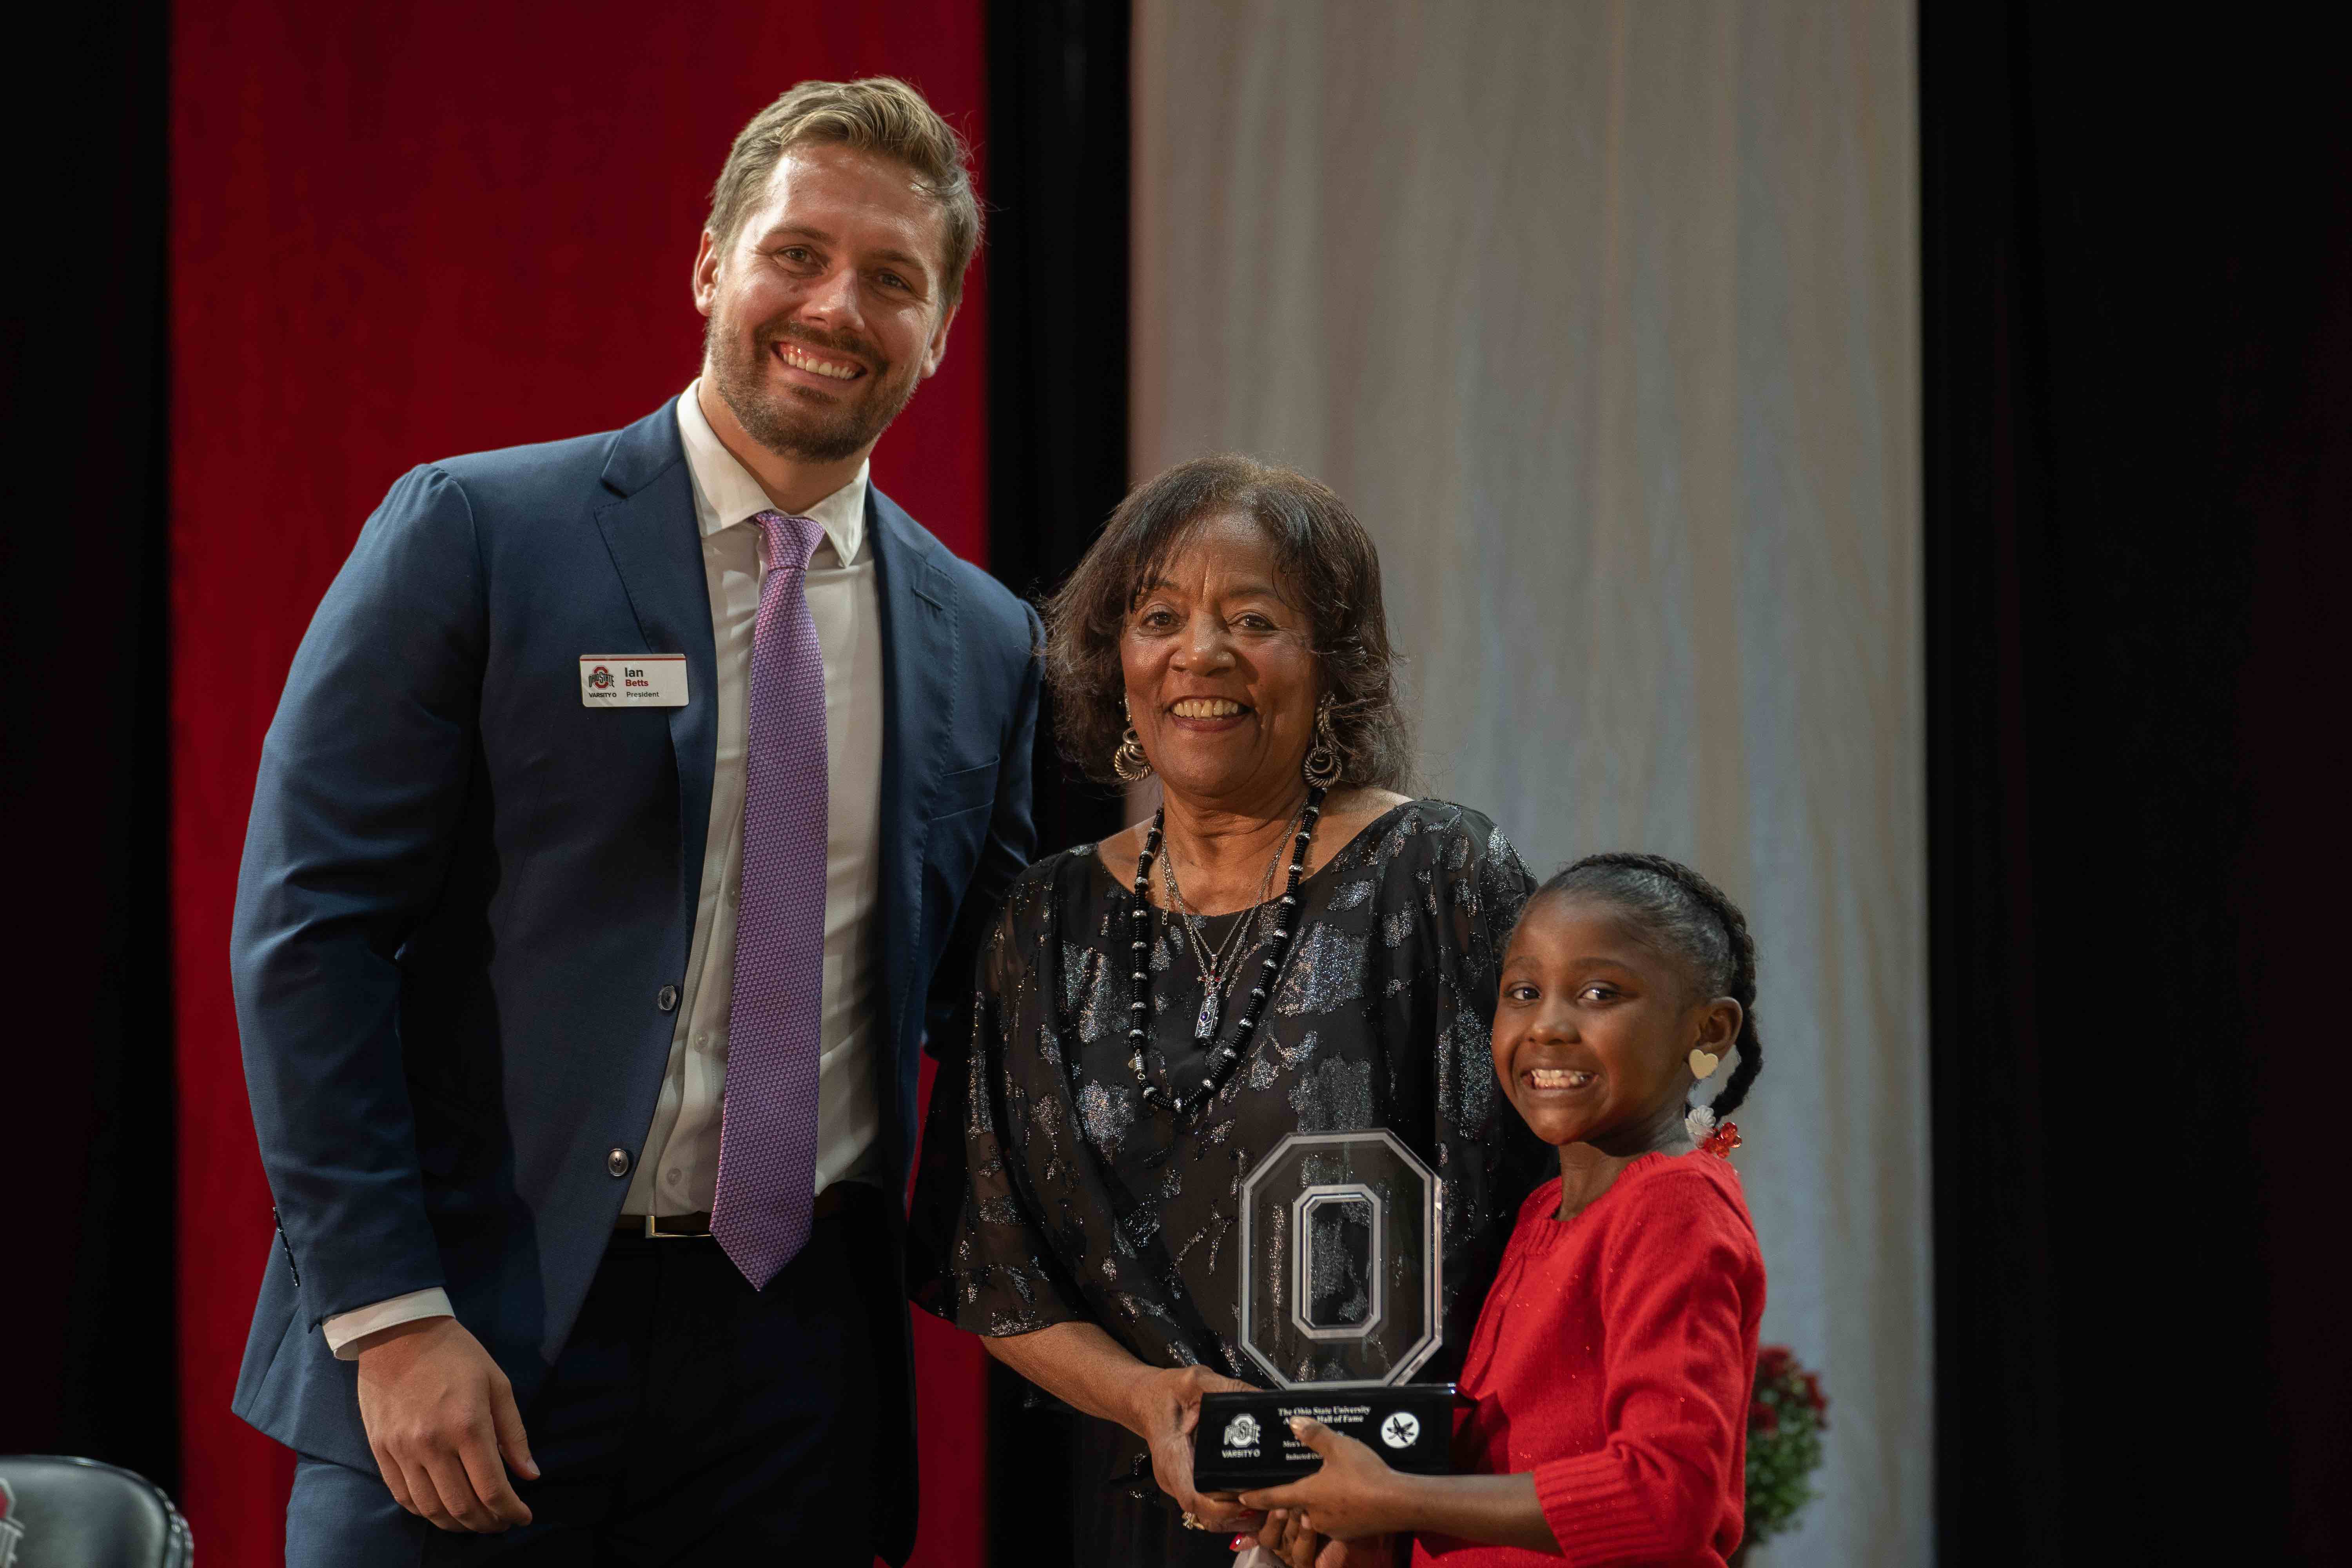 Celia Roberts accepting an award during Ohio State athletic Hall of Fame banquet with a young family member